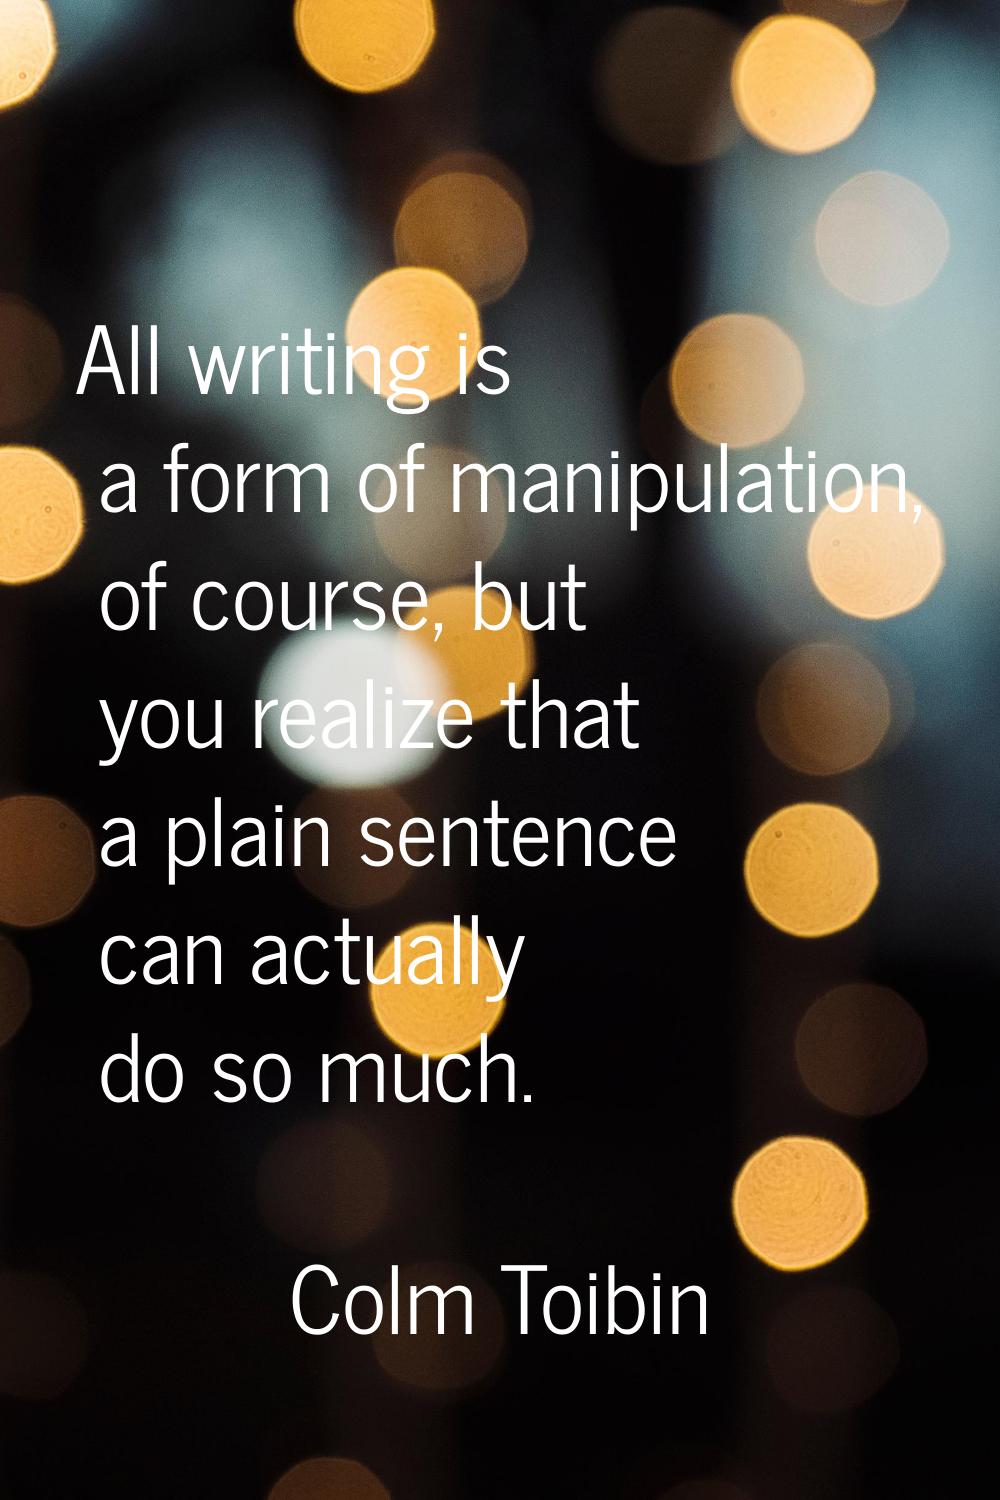 All writing is a form of manipulation, of course, but you realize that a plain sentence can actuall